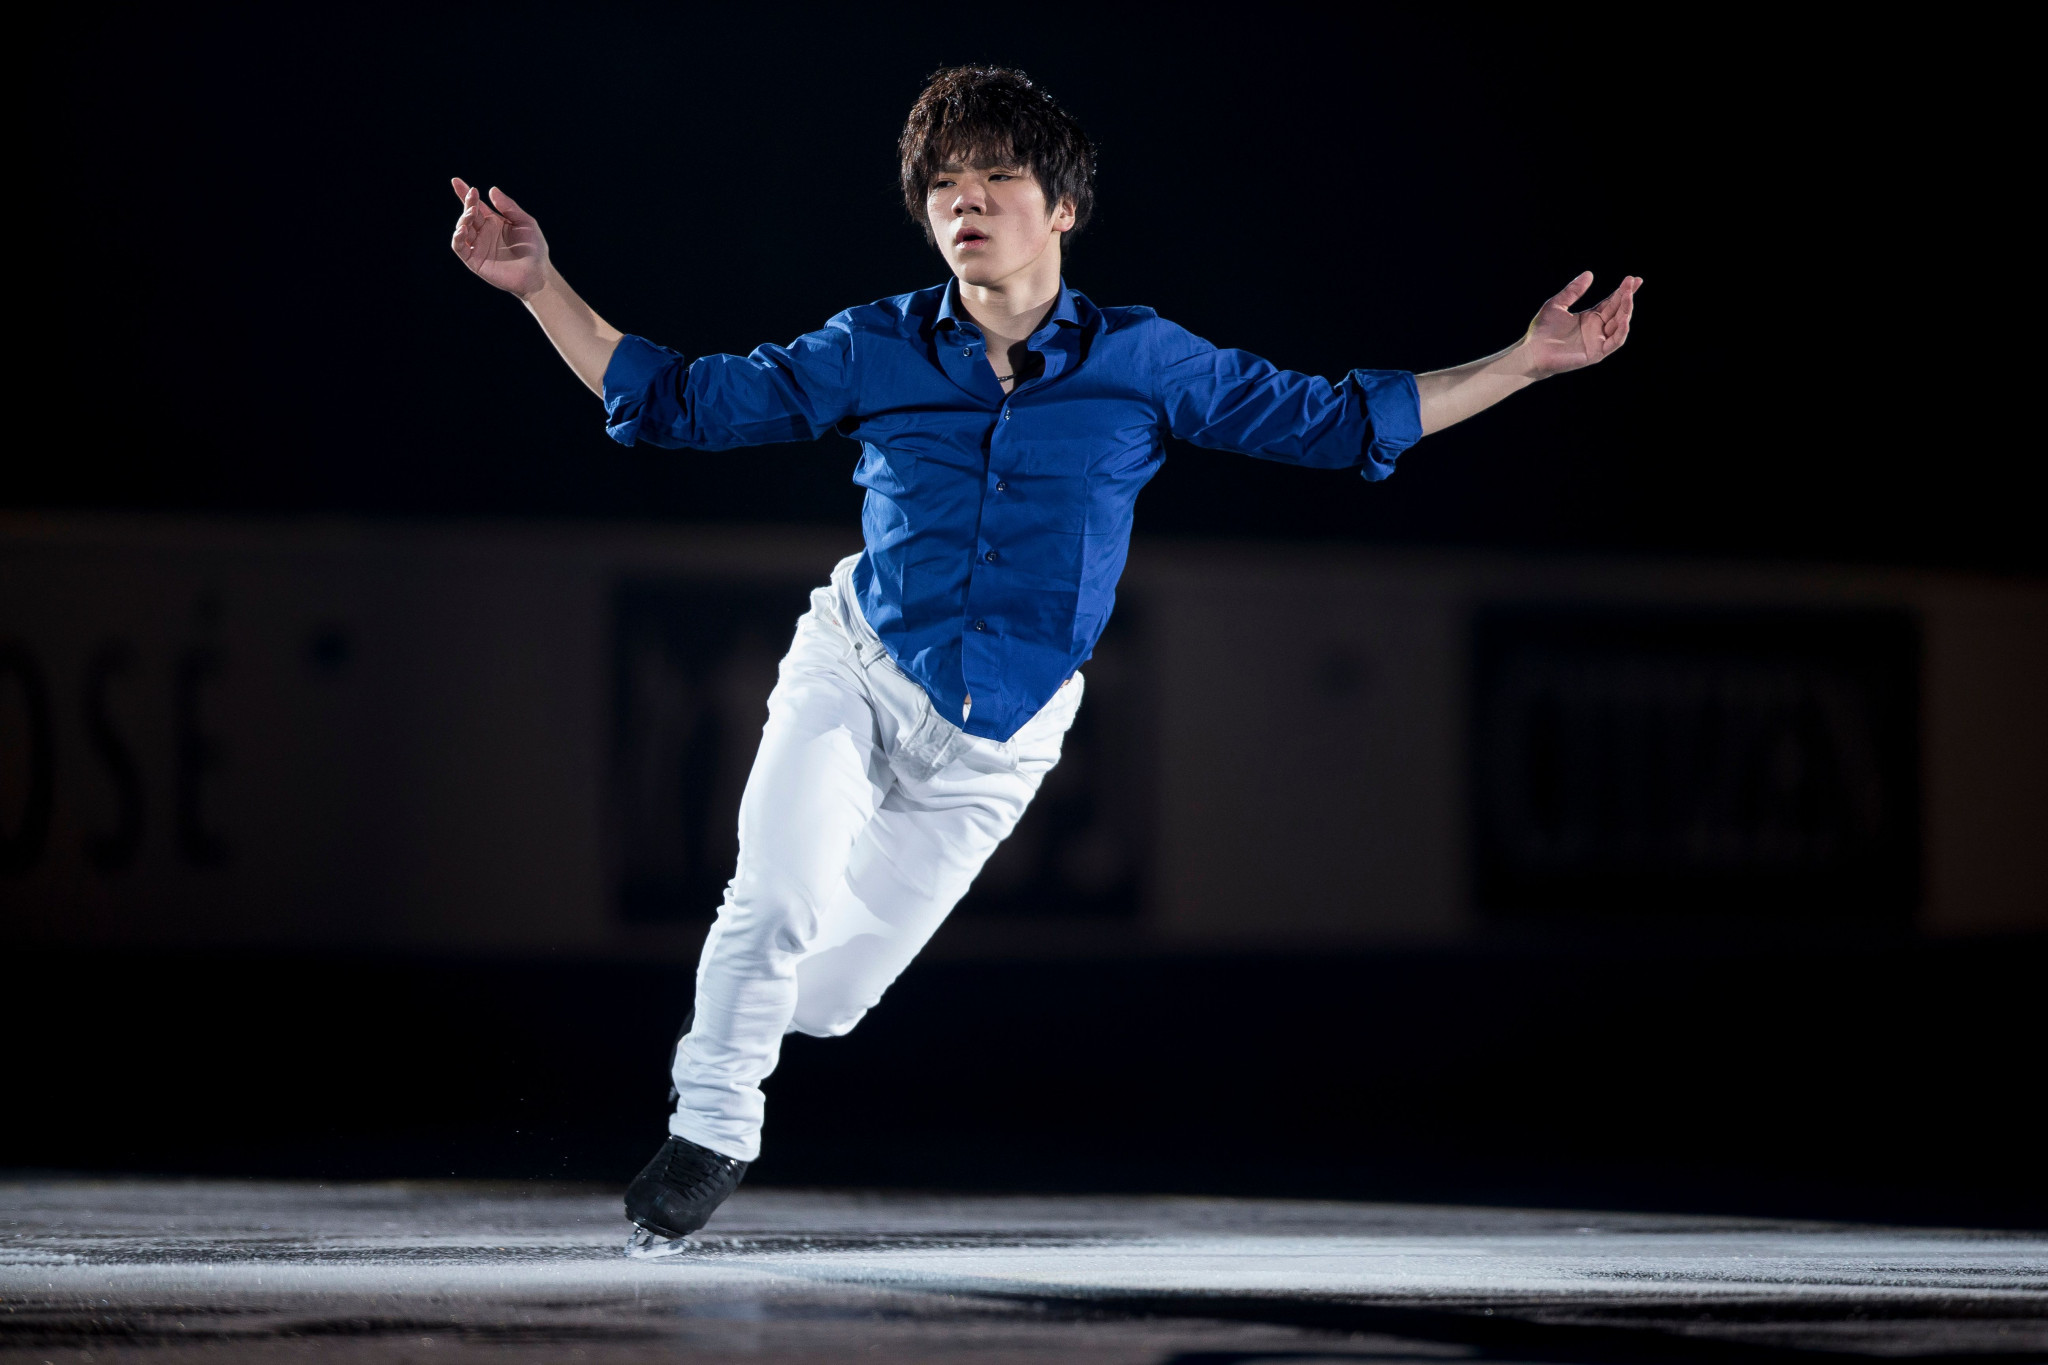 World Championships silver medallist Shoma Uno of Japan is another skater hoping to secure a place at the season-ending Final ©Getty Images